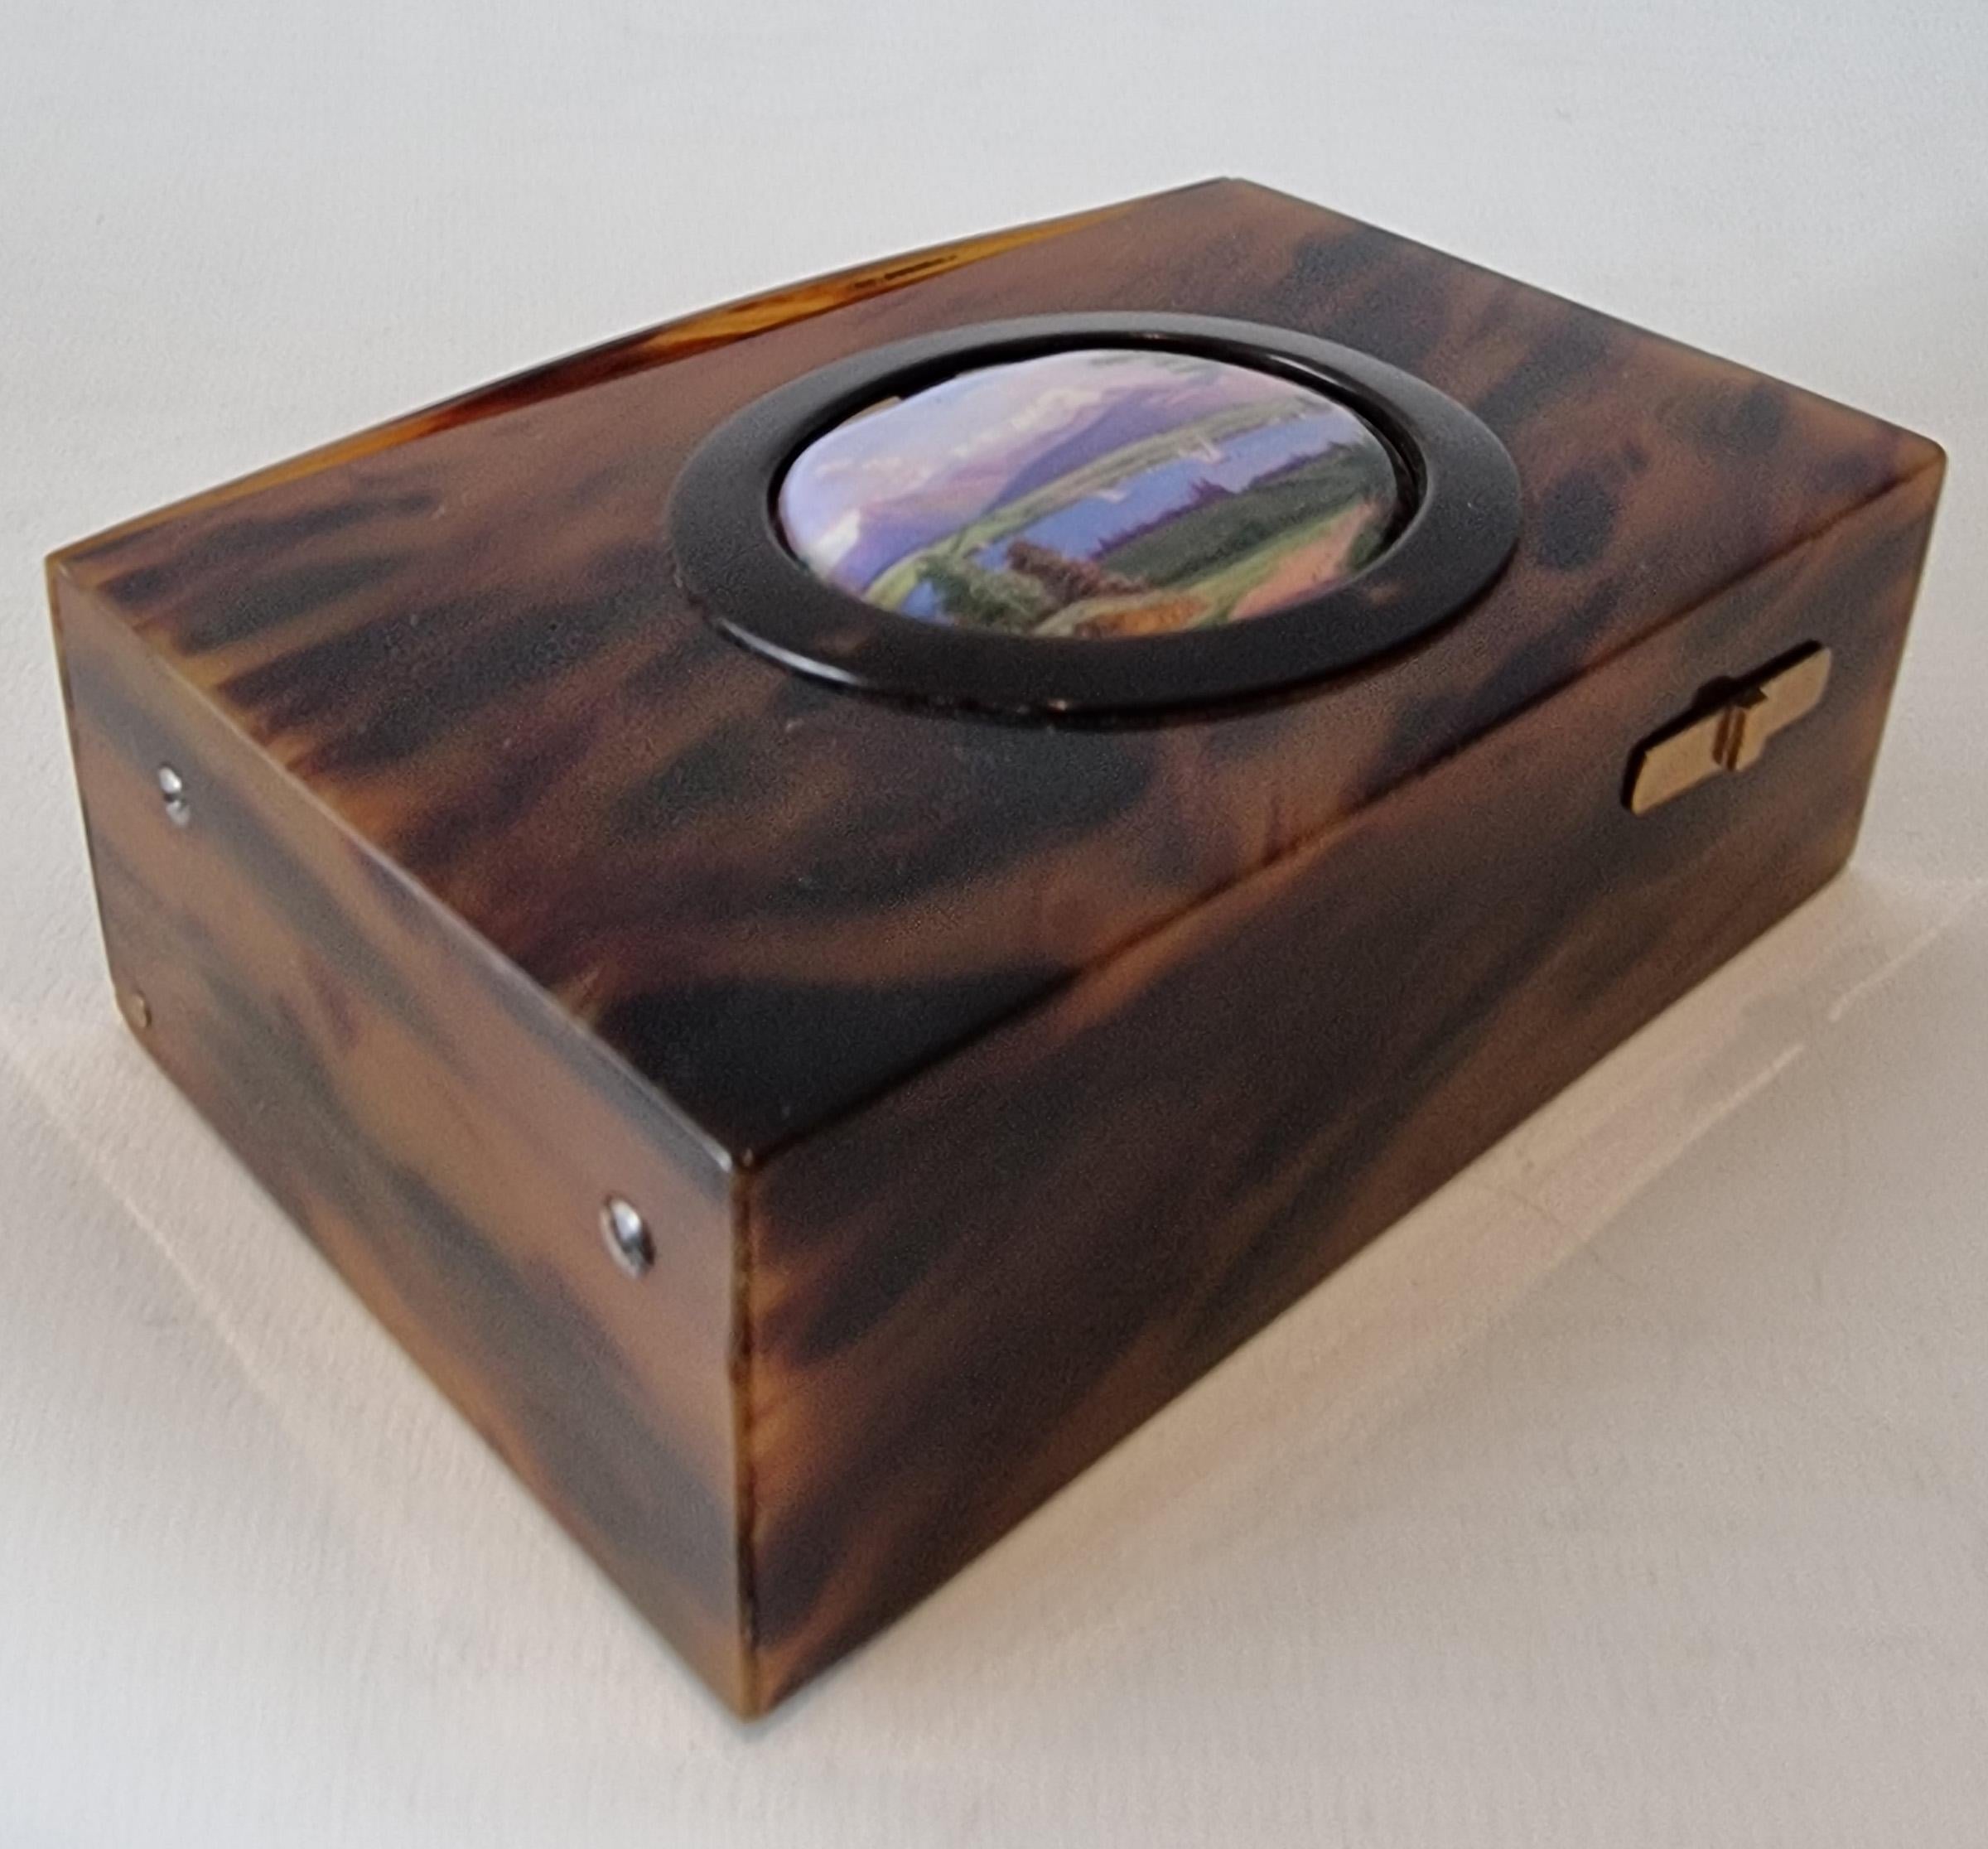 Late 19th Century Antique Pictorial enamel and underbelly-cut tortoiseshell singing bird box For Sale